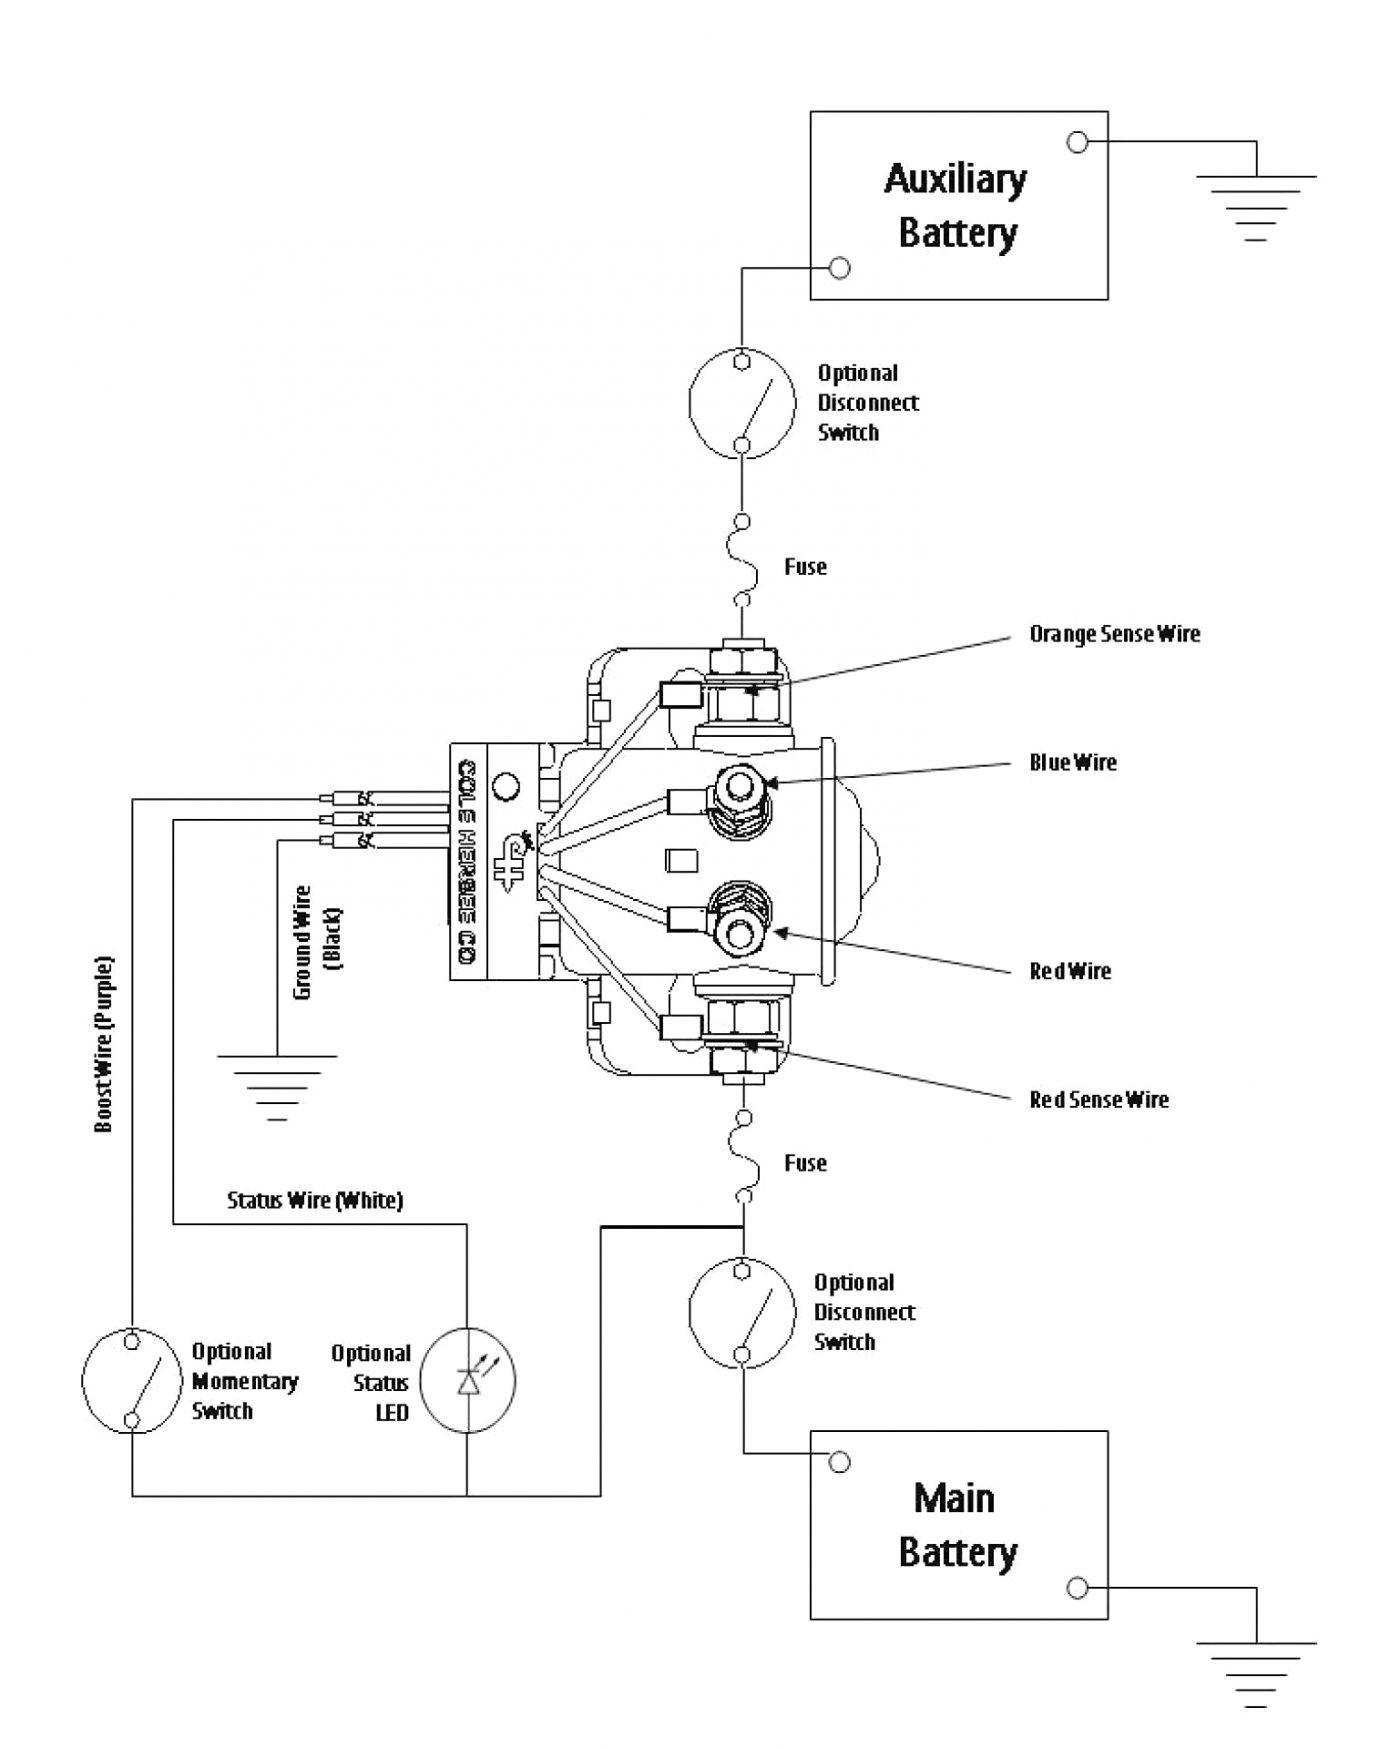 Wiring Diagram for Battery isolator Switch New Wiring Diagram Alternator to Battery New Wiring Diagram for